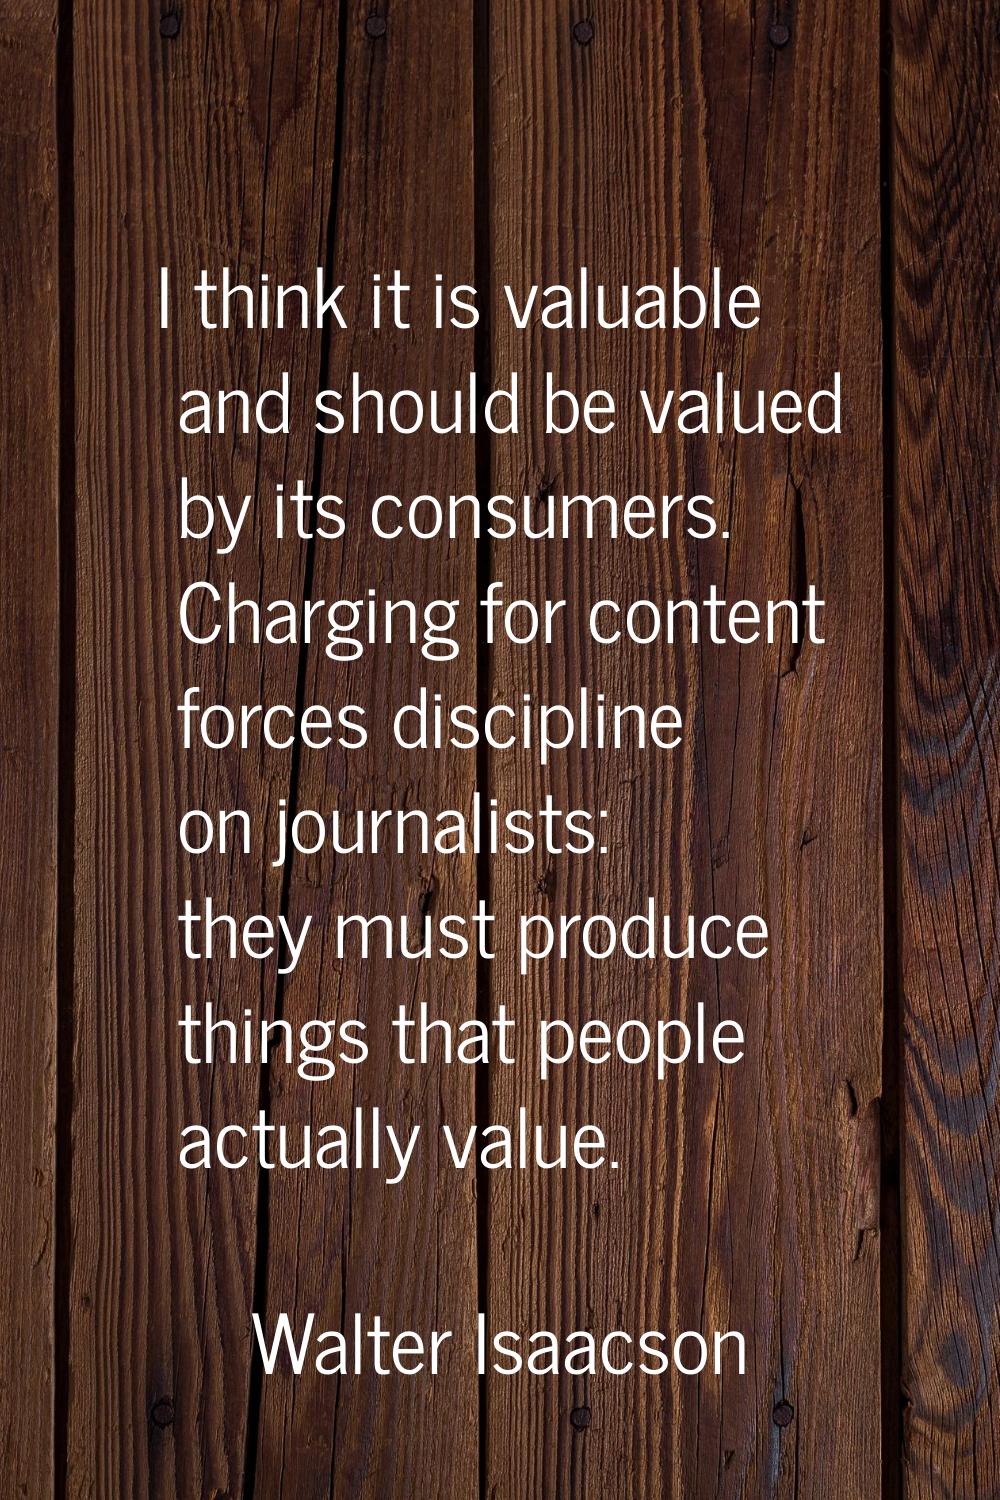 I think it is valuable and should be valued by its consumers. Charging for content forces disciplin